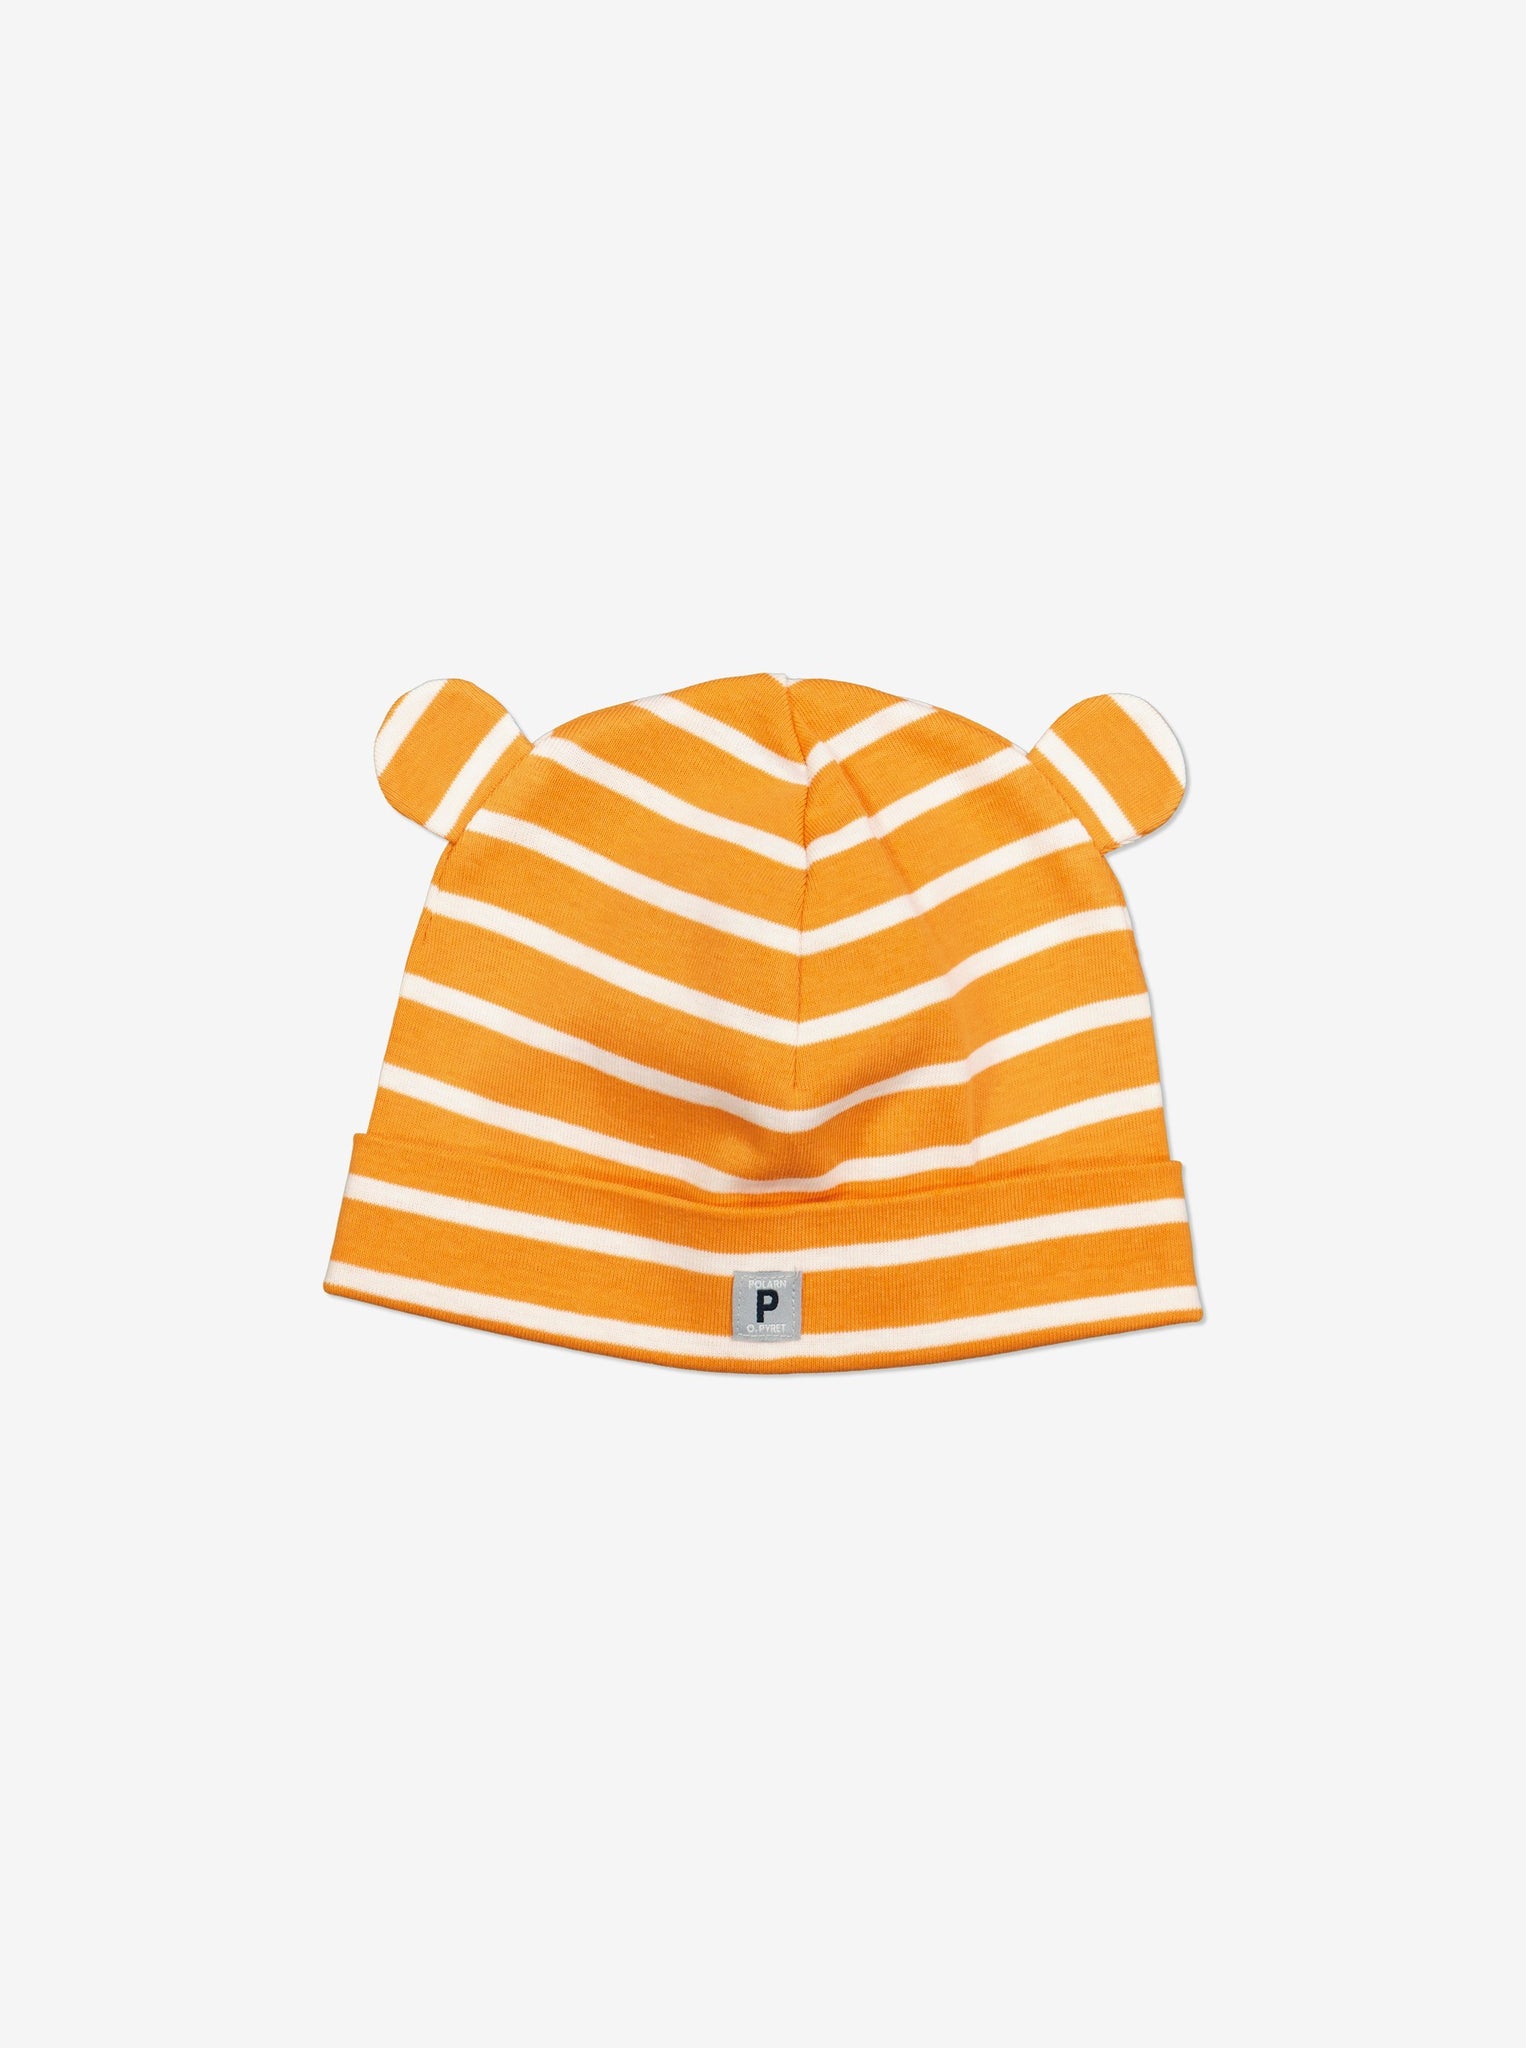  Organic Yellow Baby Beanie Hat from Polarn O. Pyret Kidswear. Made with 100% organic cotton.